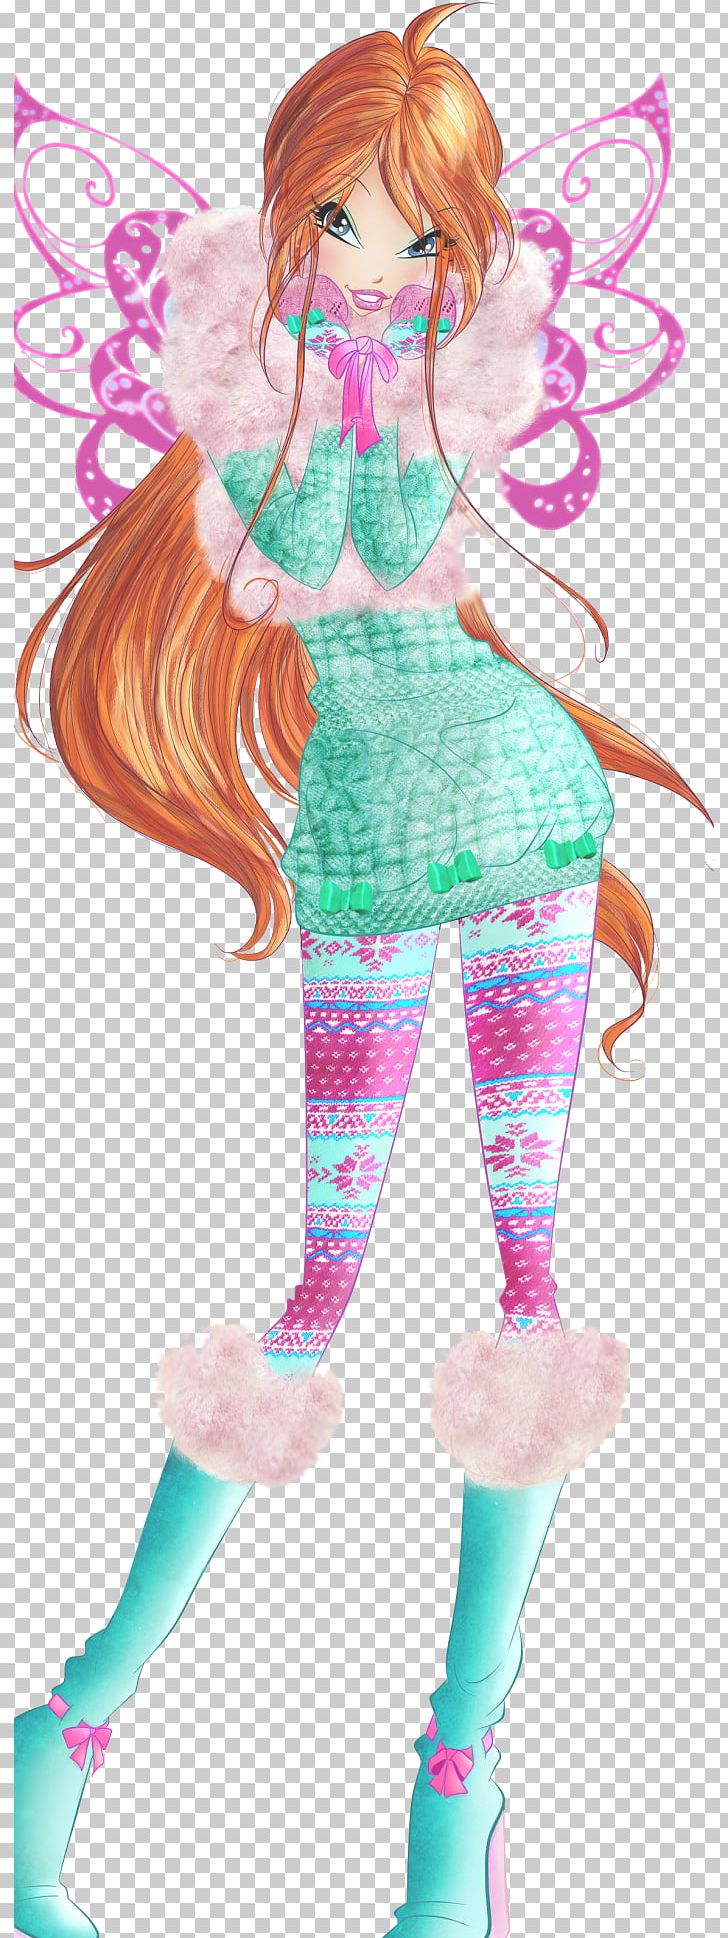 Bloom Flora Tecna Roxy Winx Club PNG, Clipart, Animated Cartoon, Animation, Anime, Art, Barbie Free PNG Download